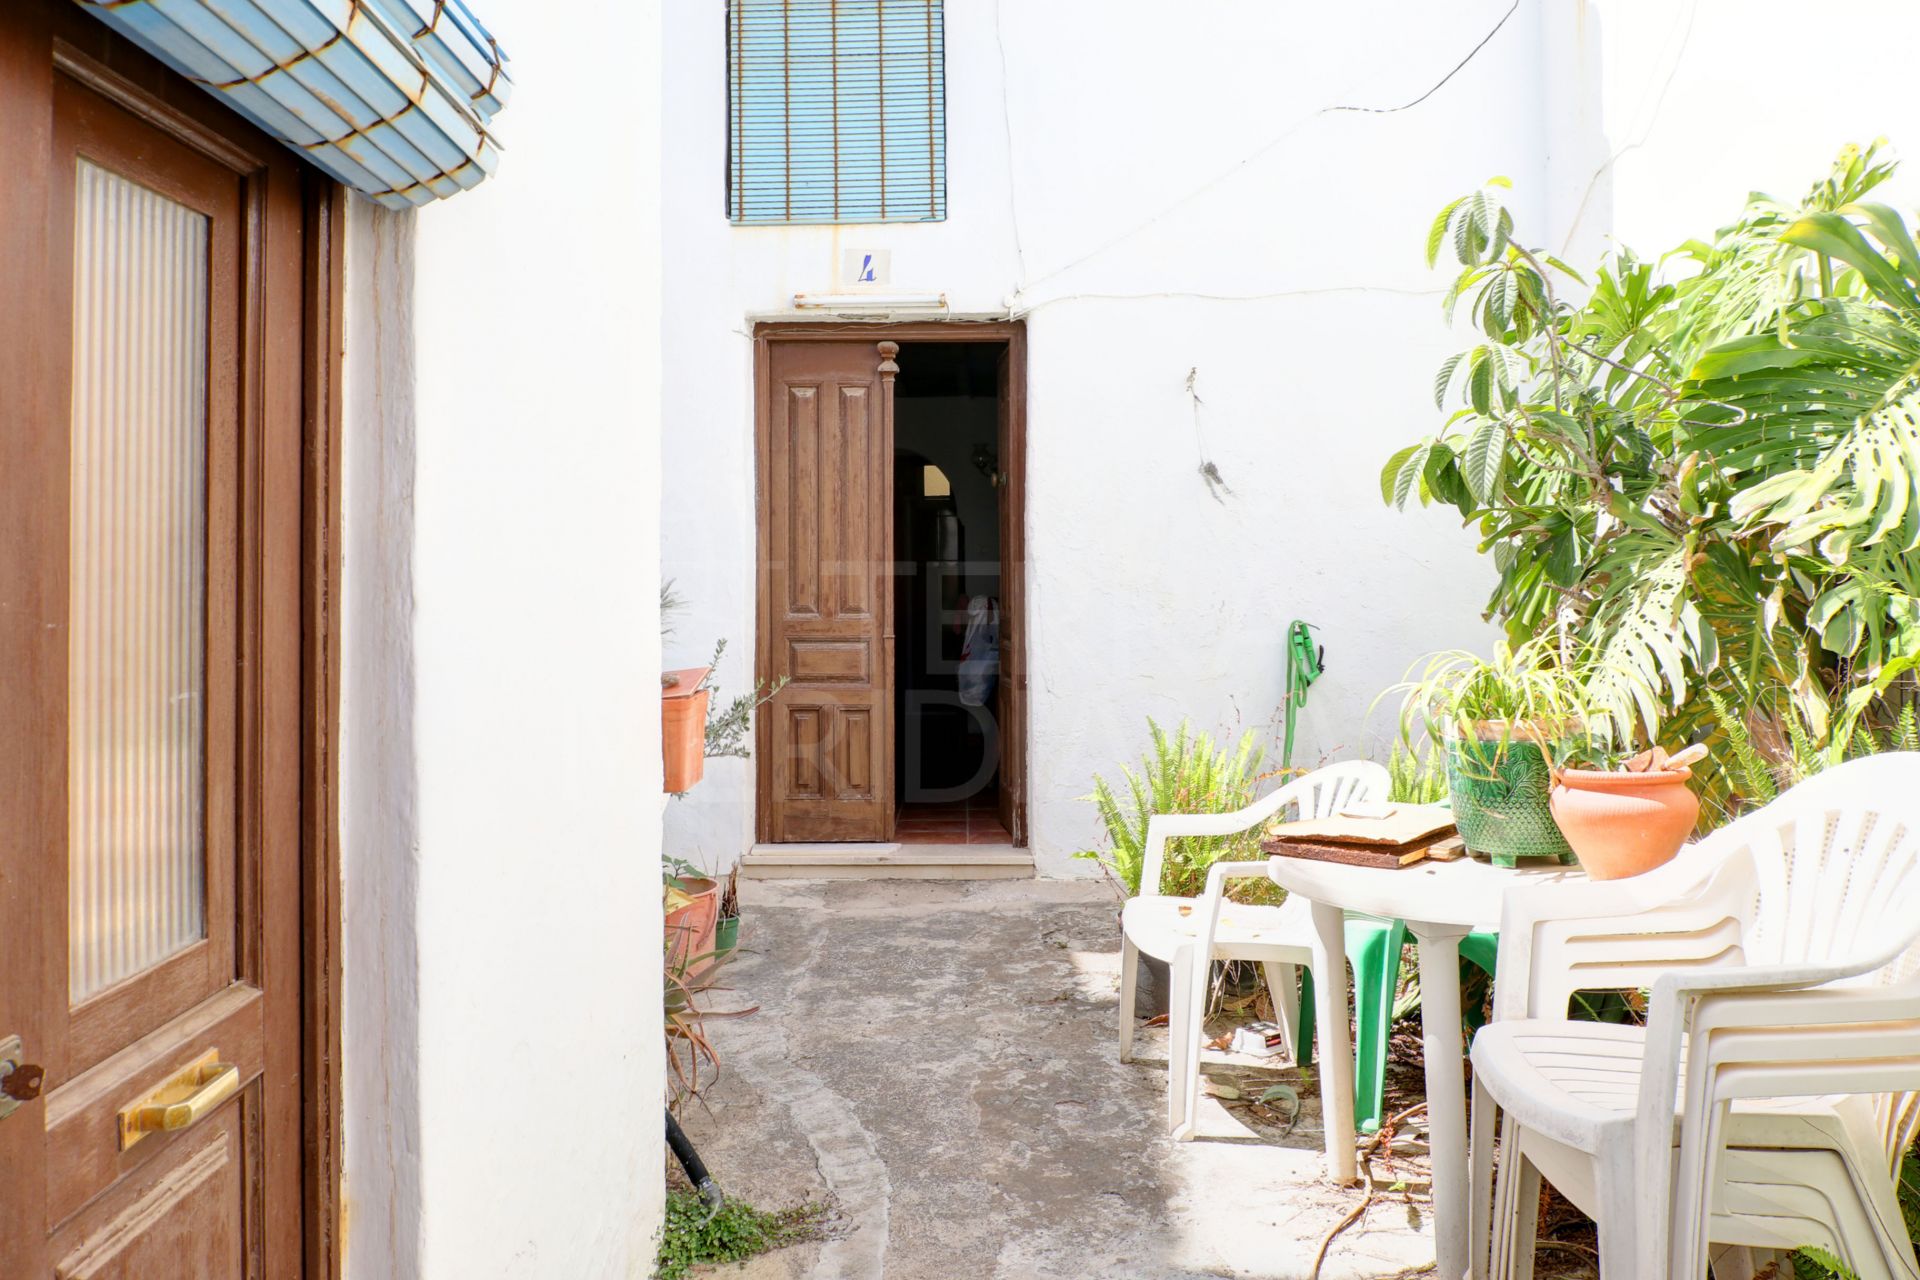 Charming townhouse to refurbish for sale in Estepona old town centre, 200 meters from the beach